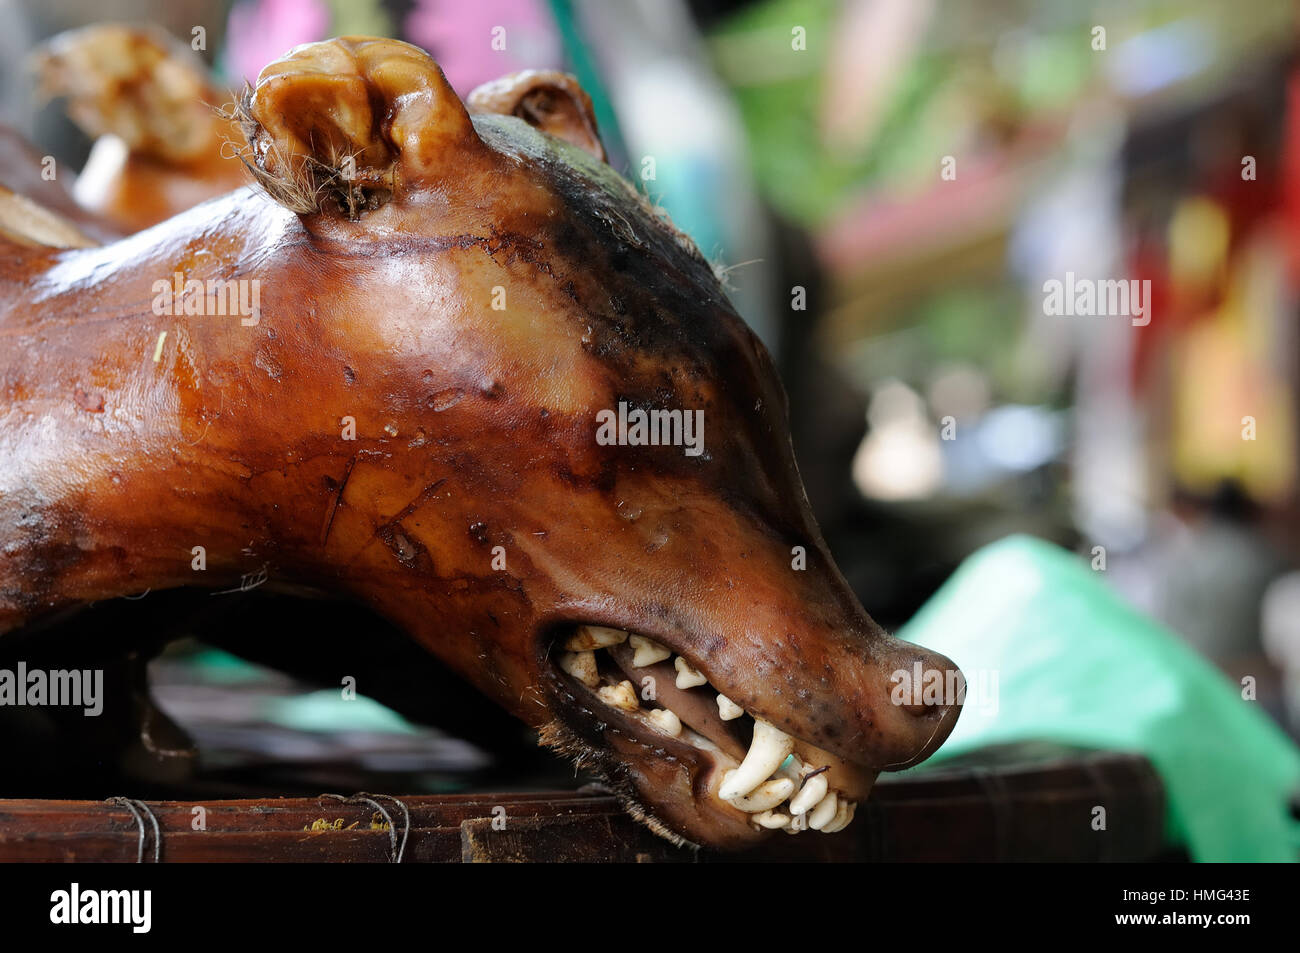 Cooked dog for buying on the stall in the capital city of Vietnam Stock Photo